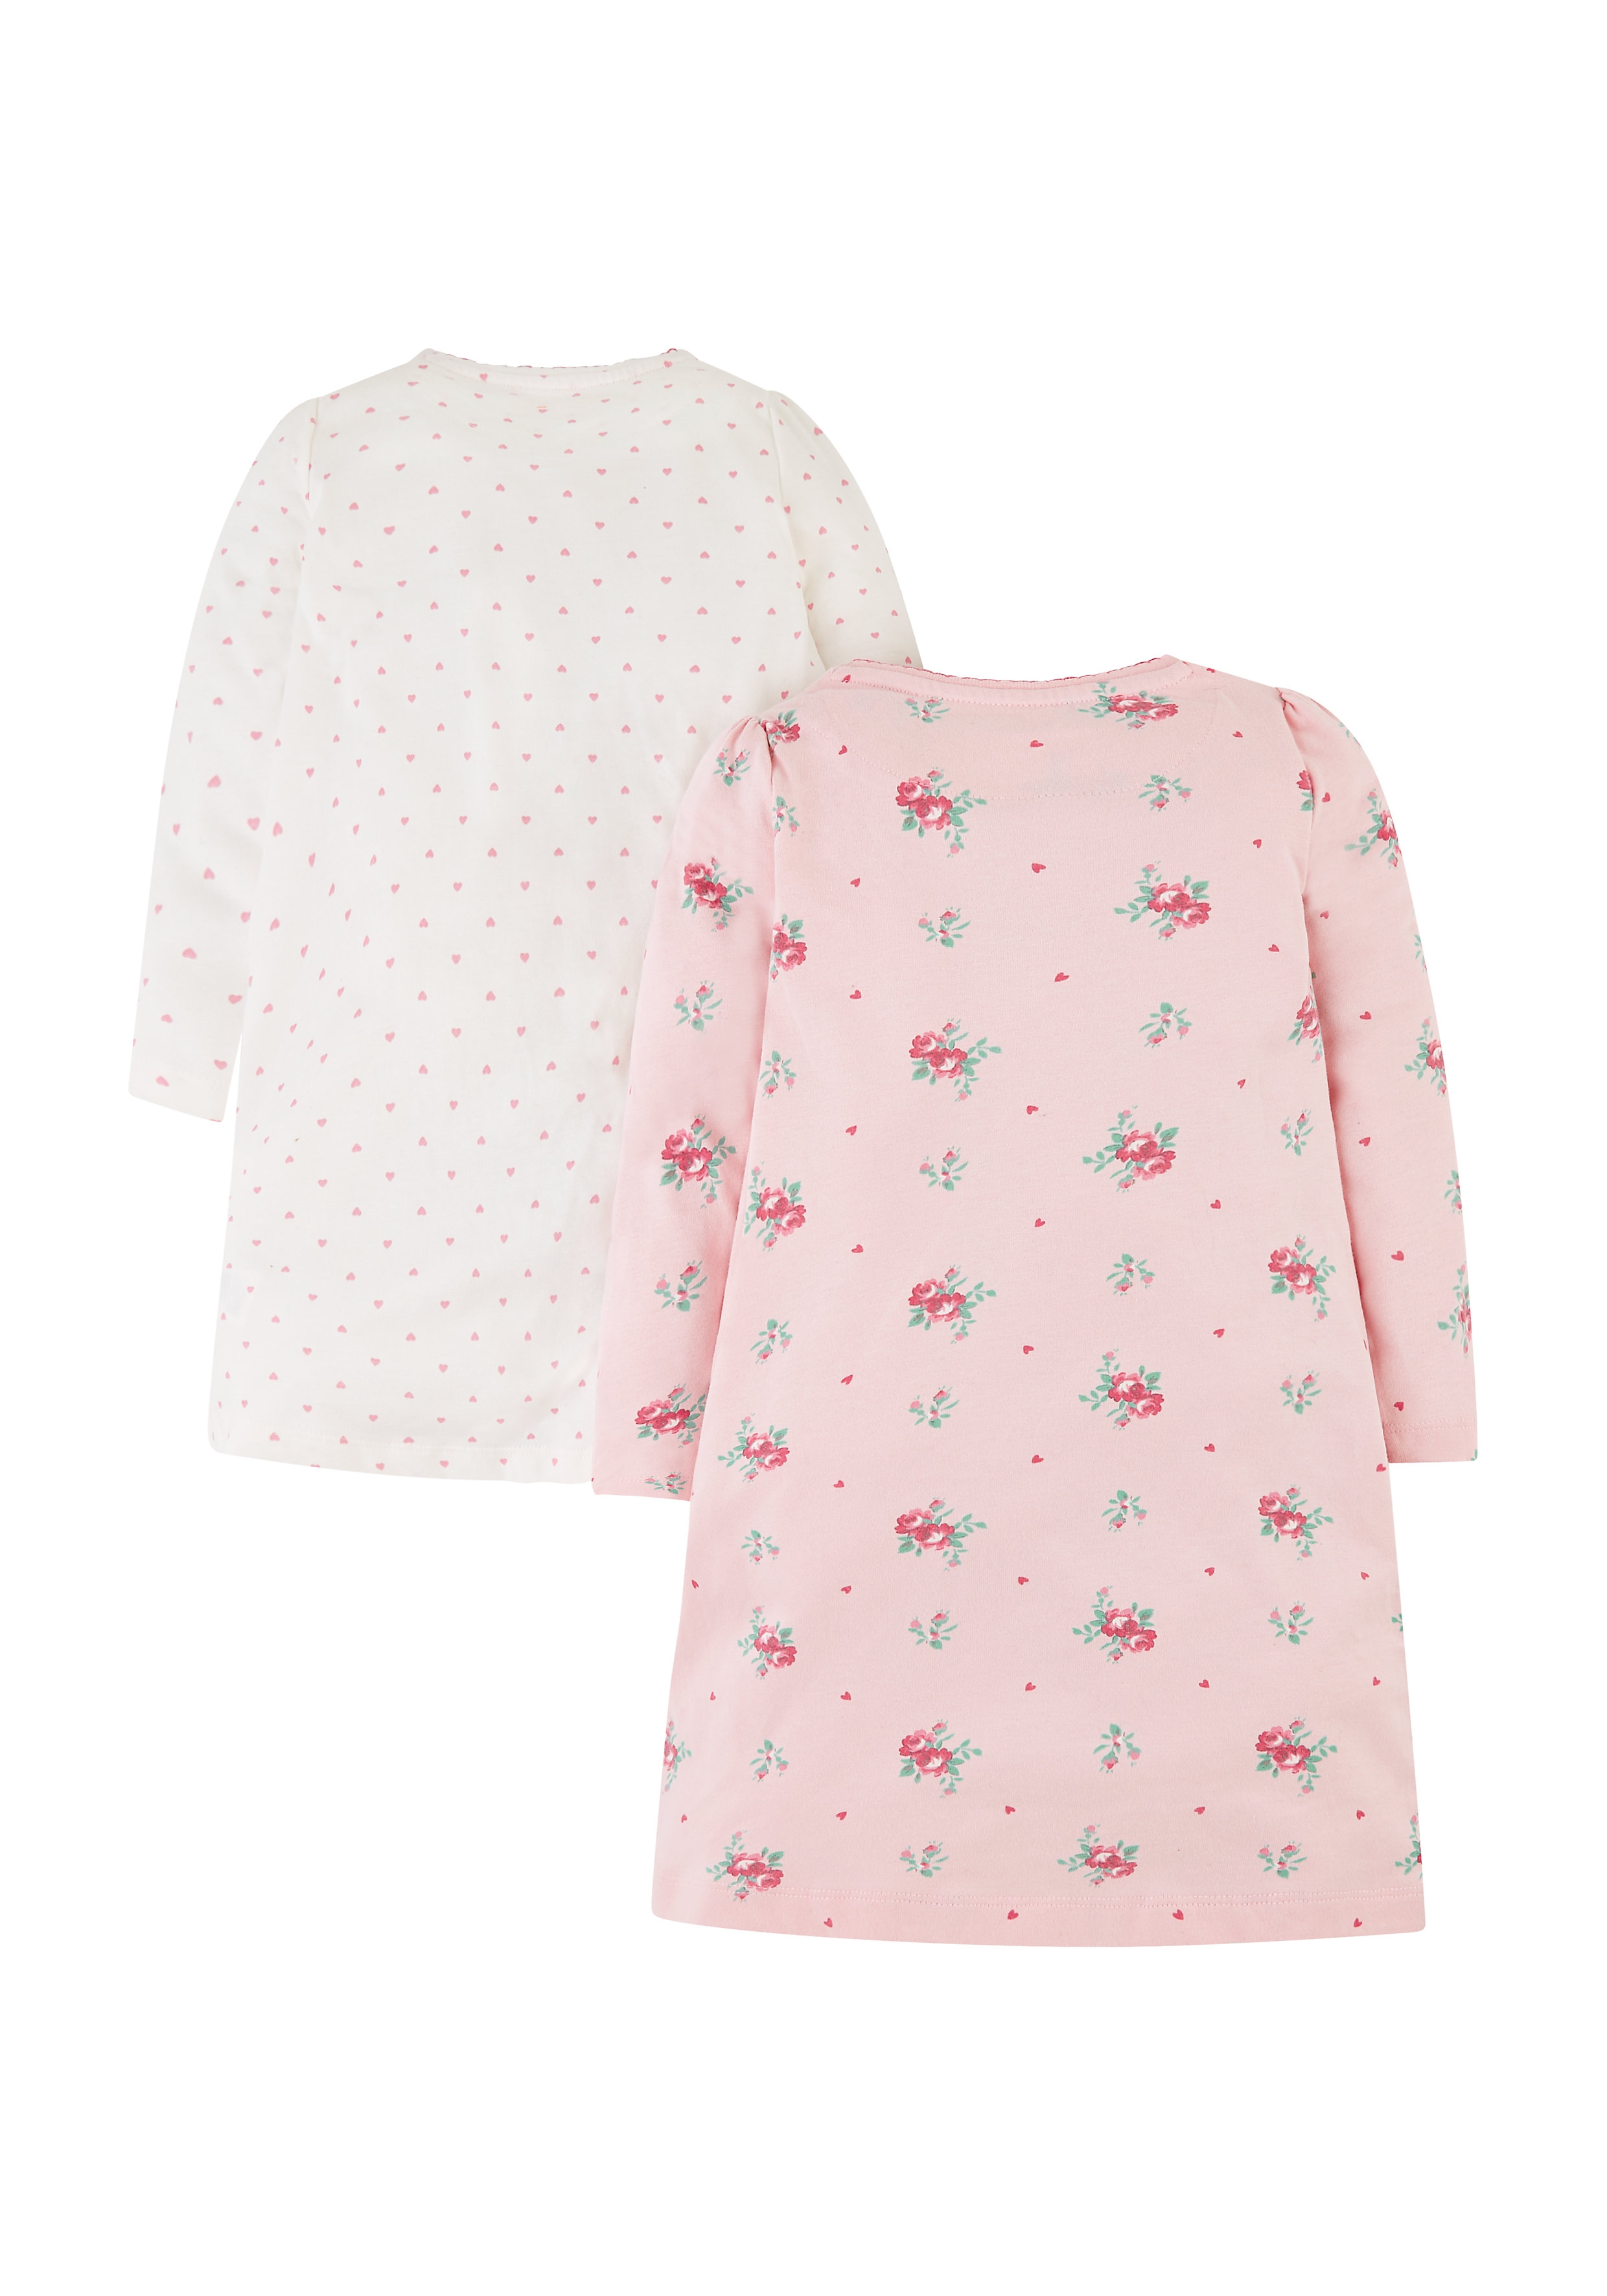 Girls Full Sleeves Nightdress Floral Print - Pack Of 2 - Pink White